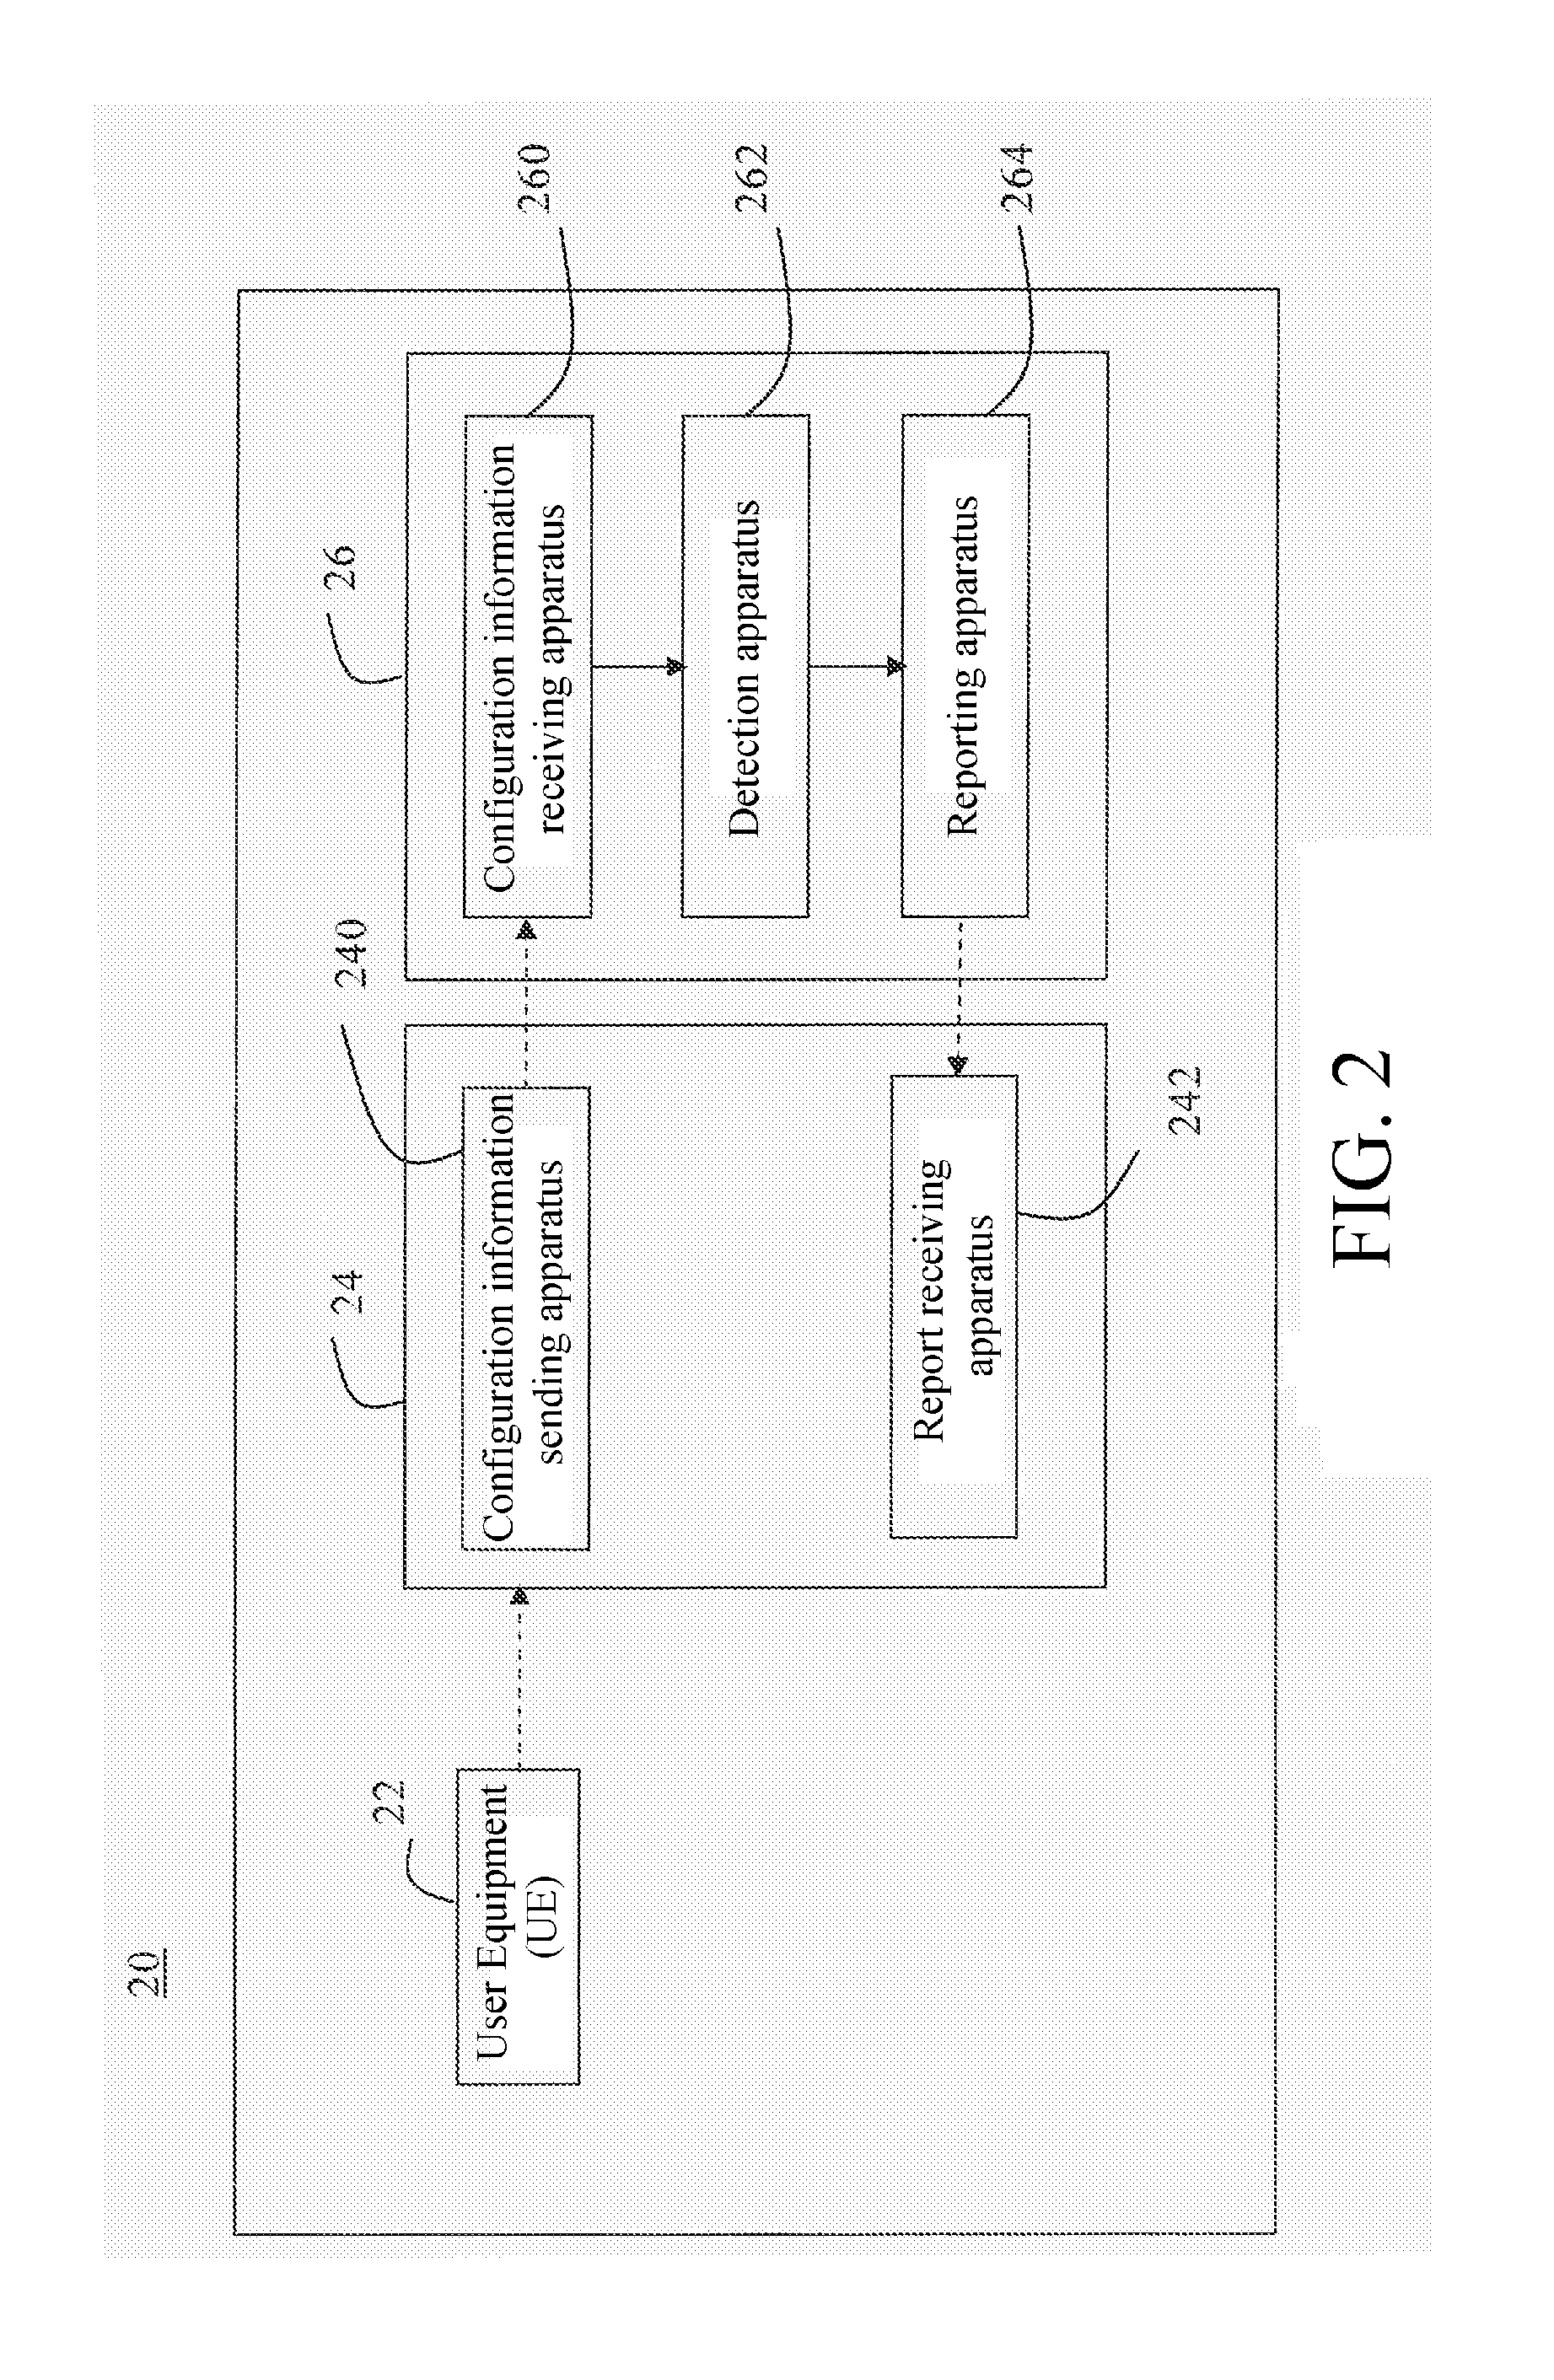 Method and apparatus for configuring coordinated multi-point measurement set